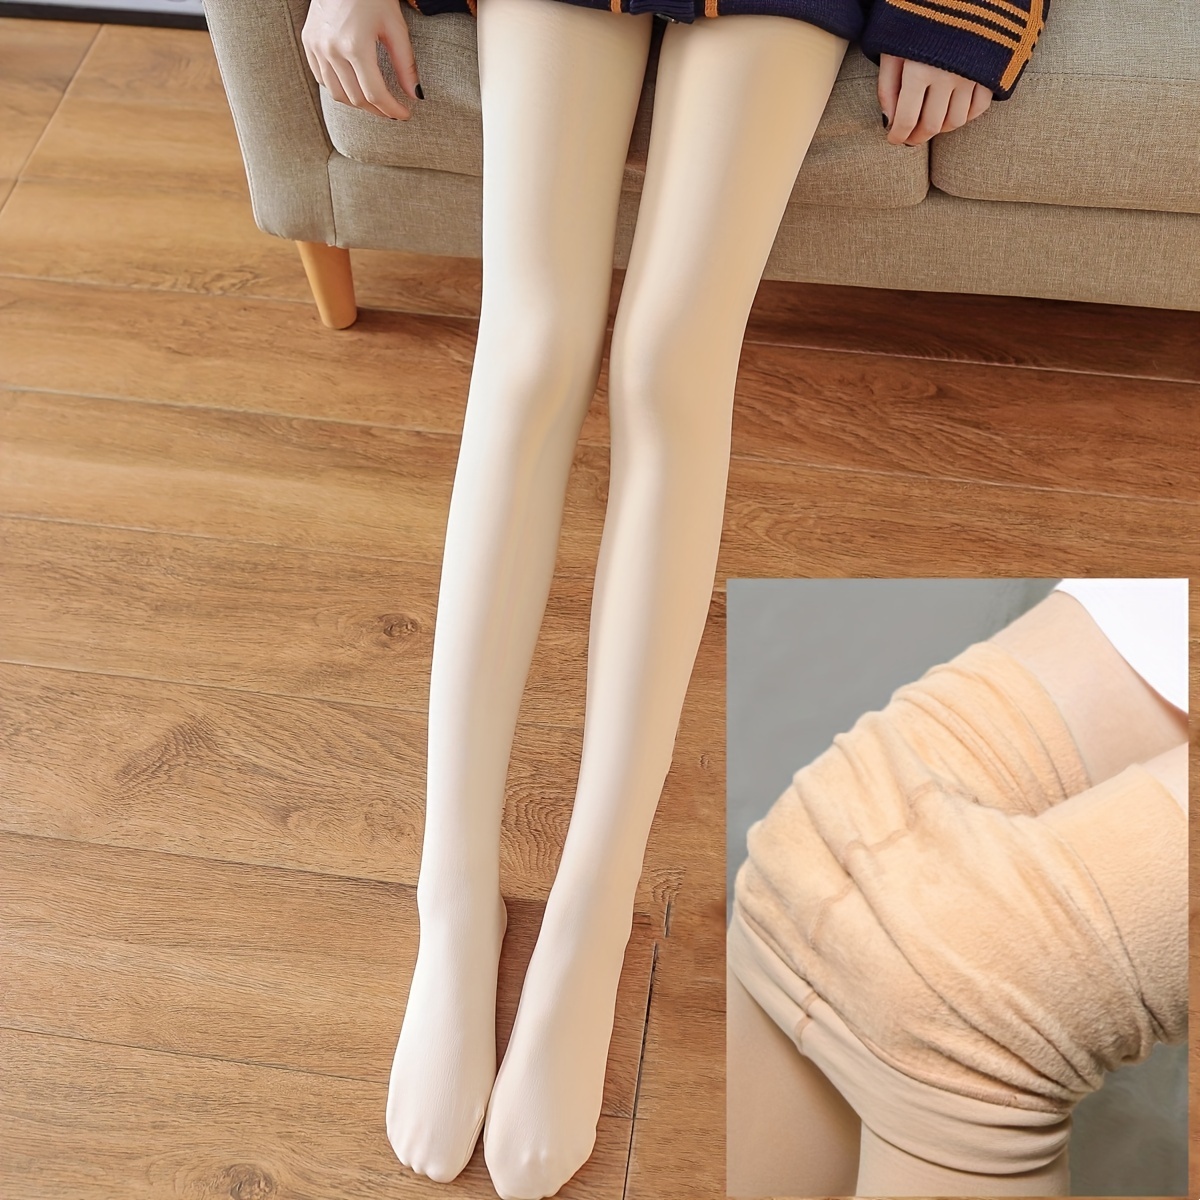 Buy Ecru Beige Coloured Tights Online - W for Woman